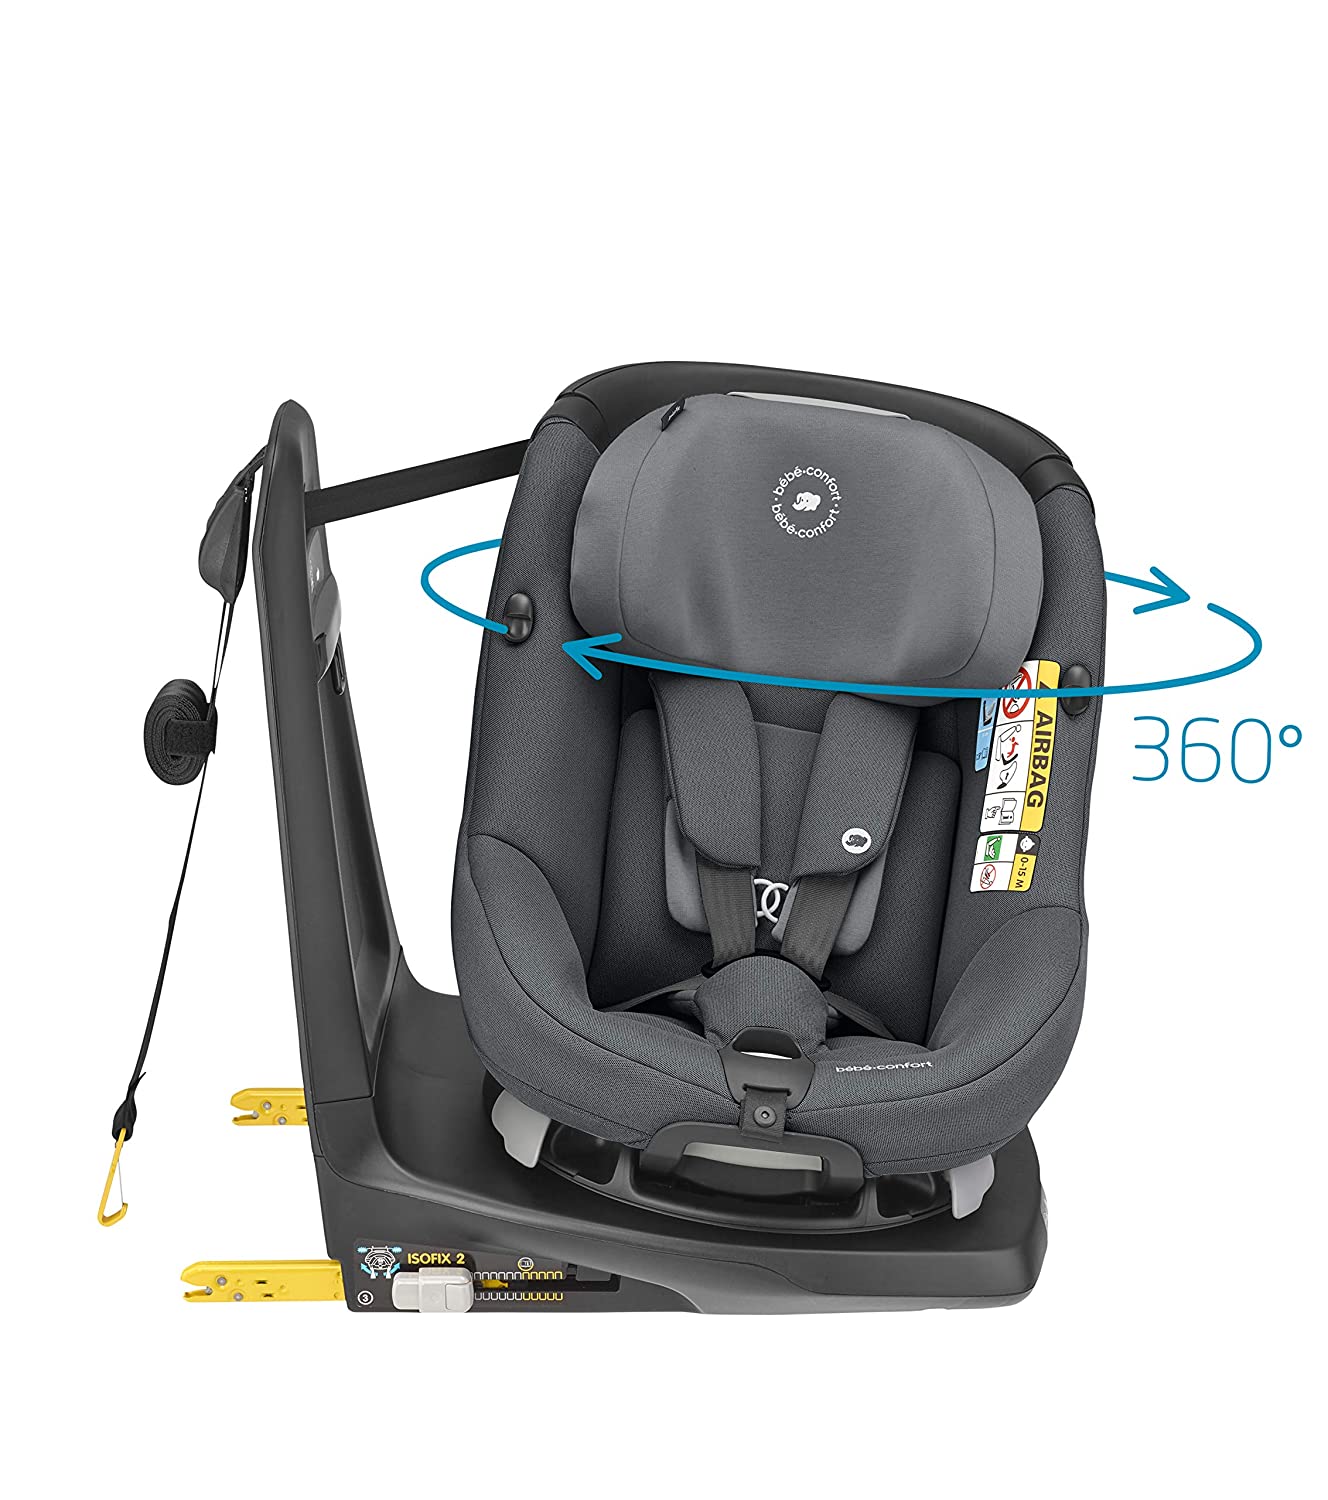 Bebe Confort Axissfix Plus Isofix Car Seat 0-18 kg 360 Degree Rotation Tilt and I-Size Approved for 0-4 Years car seat